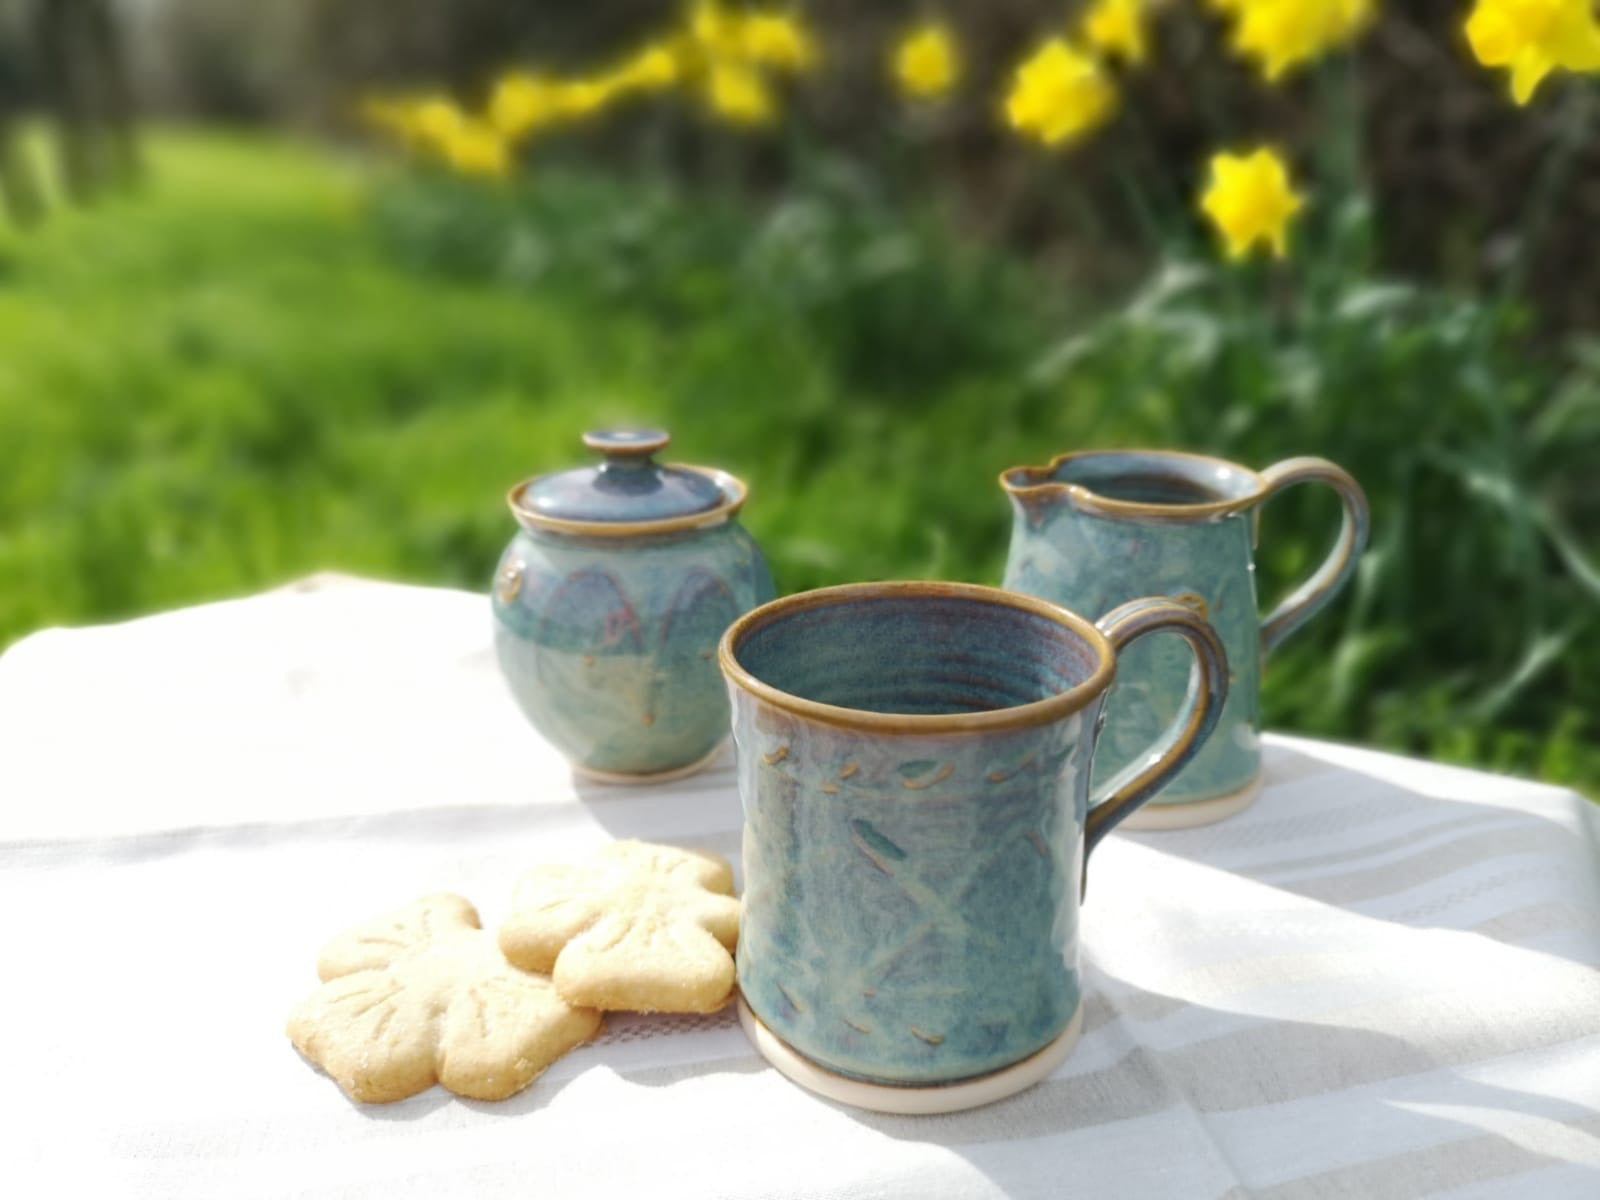 Cylinder Mug and Creamer set on outdoor table with biscuits and flowers